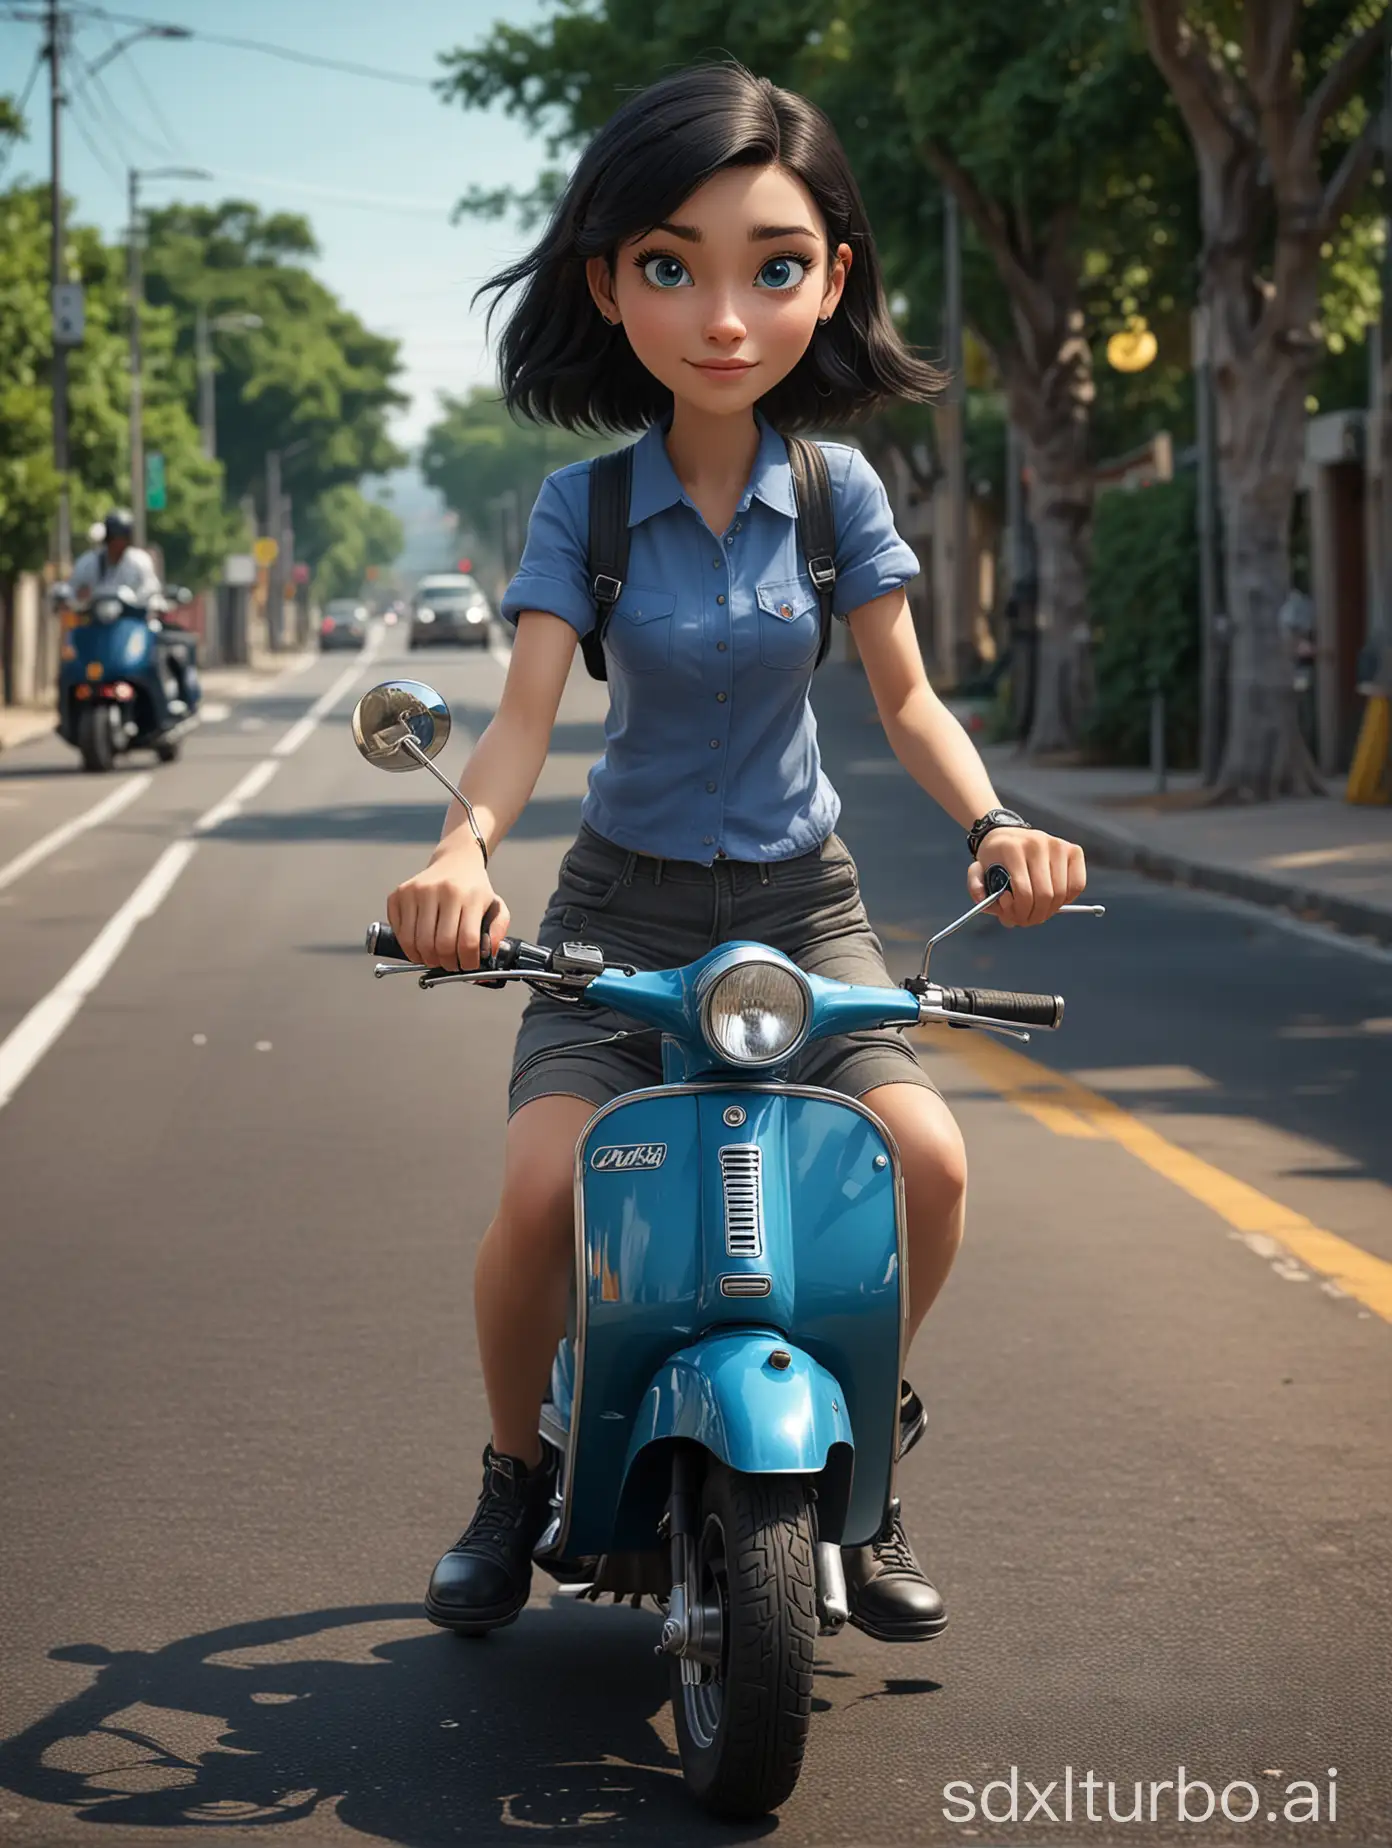 An amazing dynamic 3D photorealistic cartoon of a 21 year old Caucasian woman riding a black vespa scooter, she has long parted black hair and blue eyes, a Southern Cassowary is racing against her as they venture down the road, we see their determined faces in deep focus, gel lighting, complex, spectral rendering, inspired by Hiroaki Samura,  visually rich, Australia, stunning, 999 centillion resolution, 9999k, accurate color grading, sub-pixel detail, highest quality, Octane 10 render, seamless transitions, HDR, ray traced, bump mapping, depth of field, ARRI ALEXA Mini LF, ARRI Signature Prime 99999999999999999999999999999999999999999999999999999999999999999999999999999999999999999999999999999999999999999999999999999999999999999999999999999999999999999999999999999999999999999999999999999999999999999999999999999999999999999999999999999999999999999999999999999999999999999999999999999999999999999999999999999999999999999999999999999999999999mm, f/1.8-2L, ar 1:1, illustration, cinematic, 3d render, painting, anime